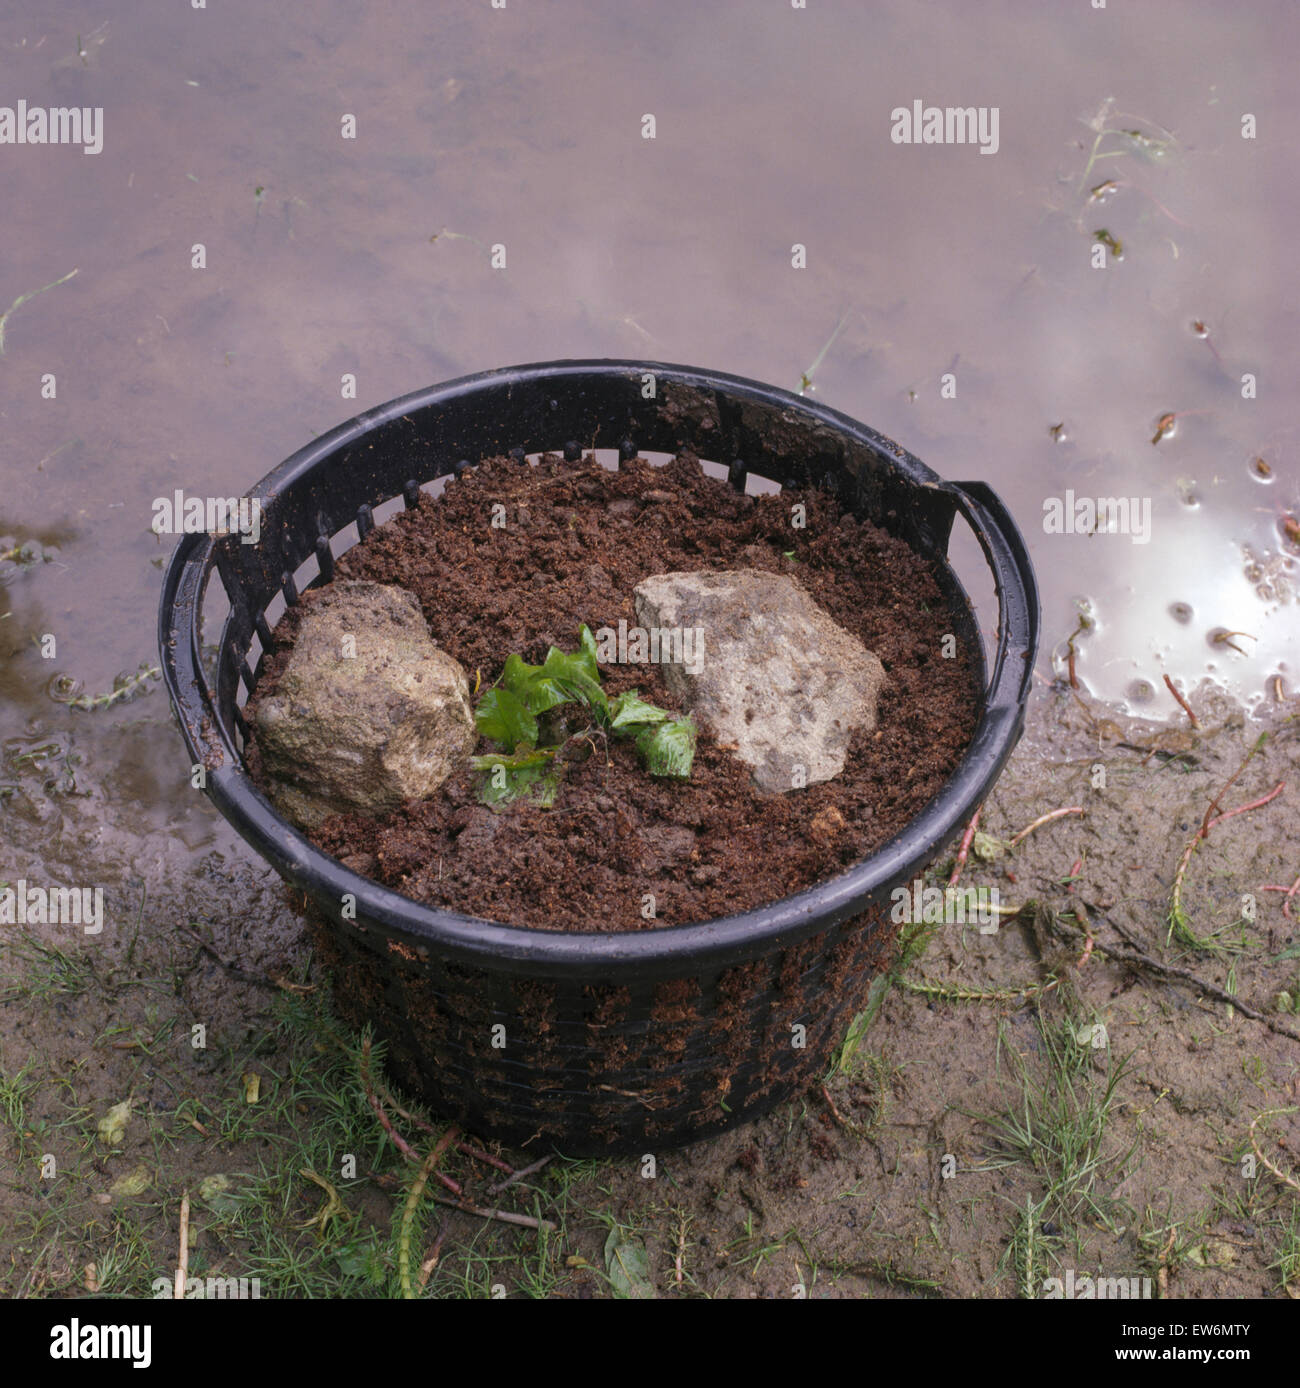 Close-up of a black plastic basket with a water plant to place in a newly made pond Stock Photo